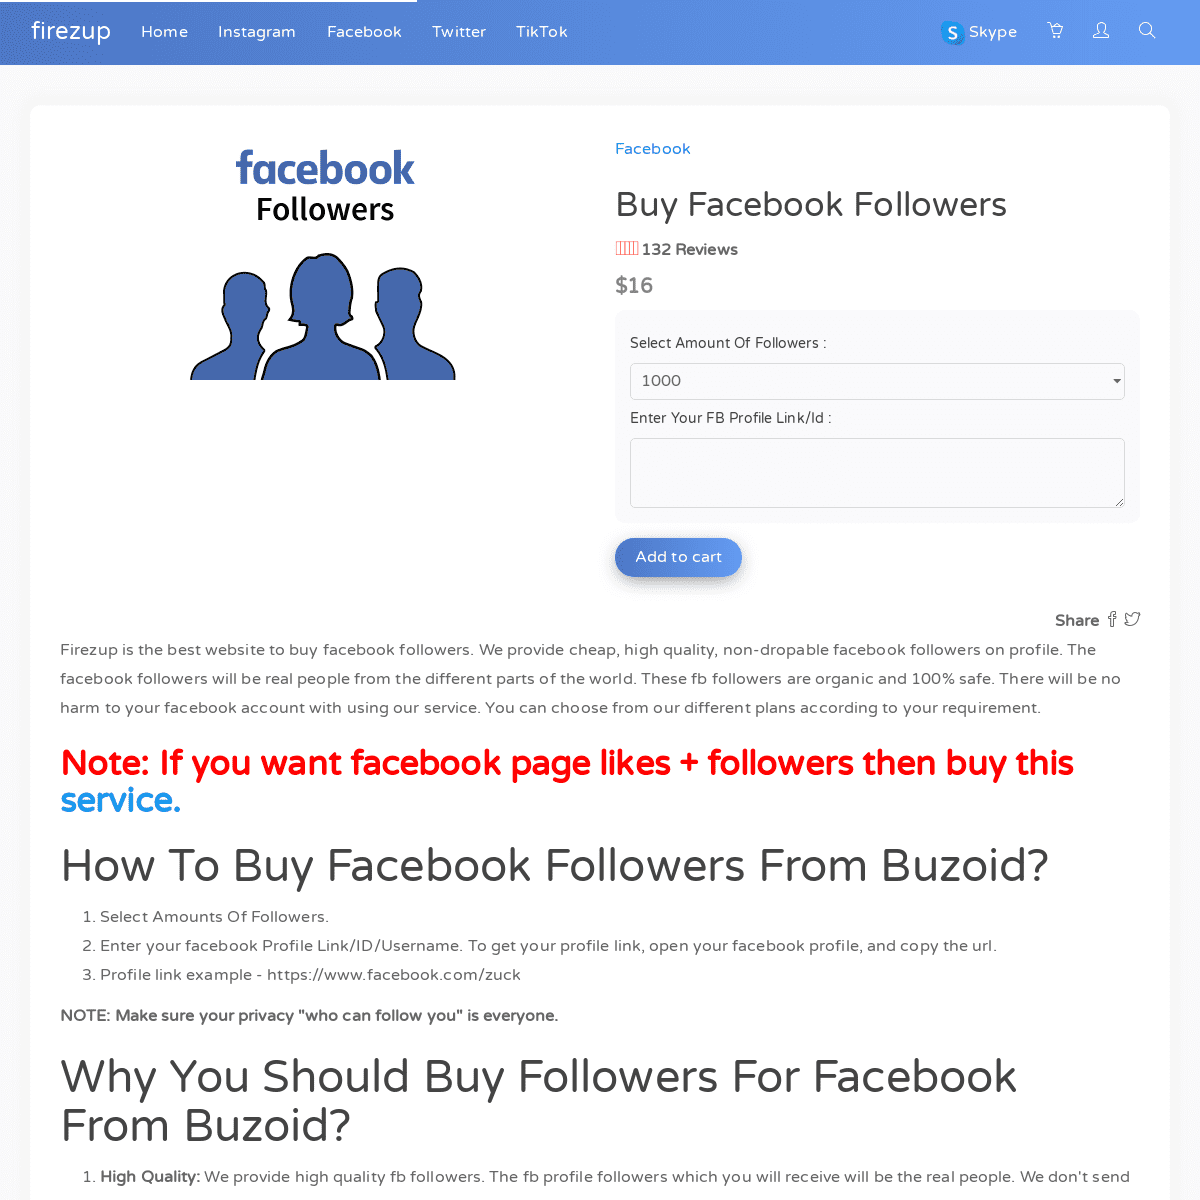 A complete backup of https://firezup.com/buy/facebook-followers